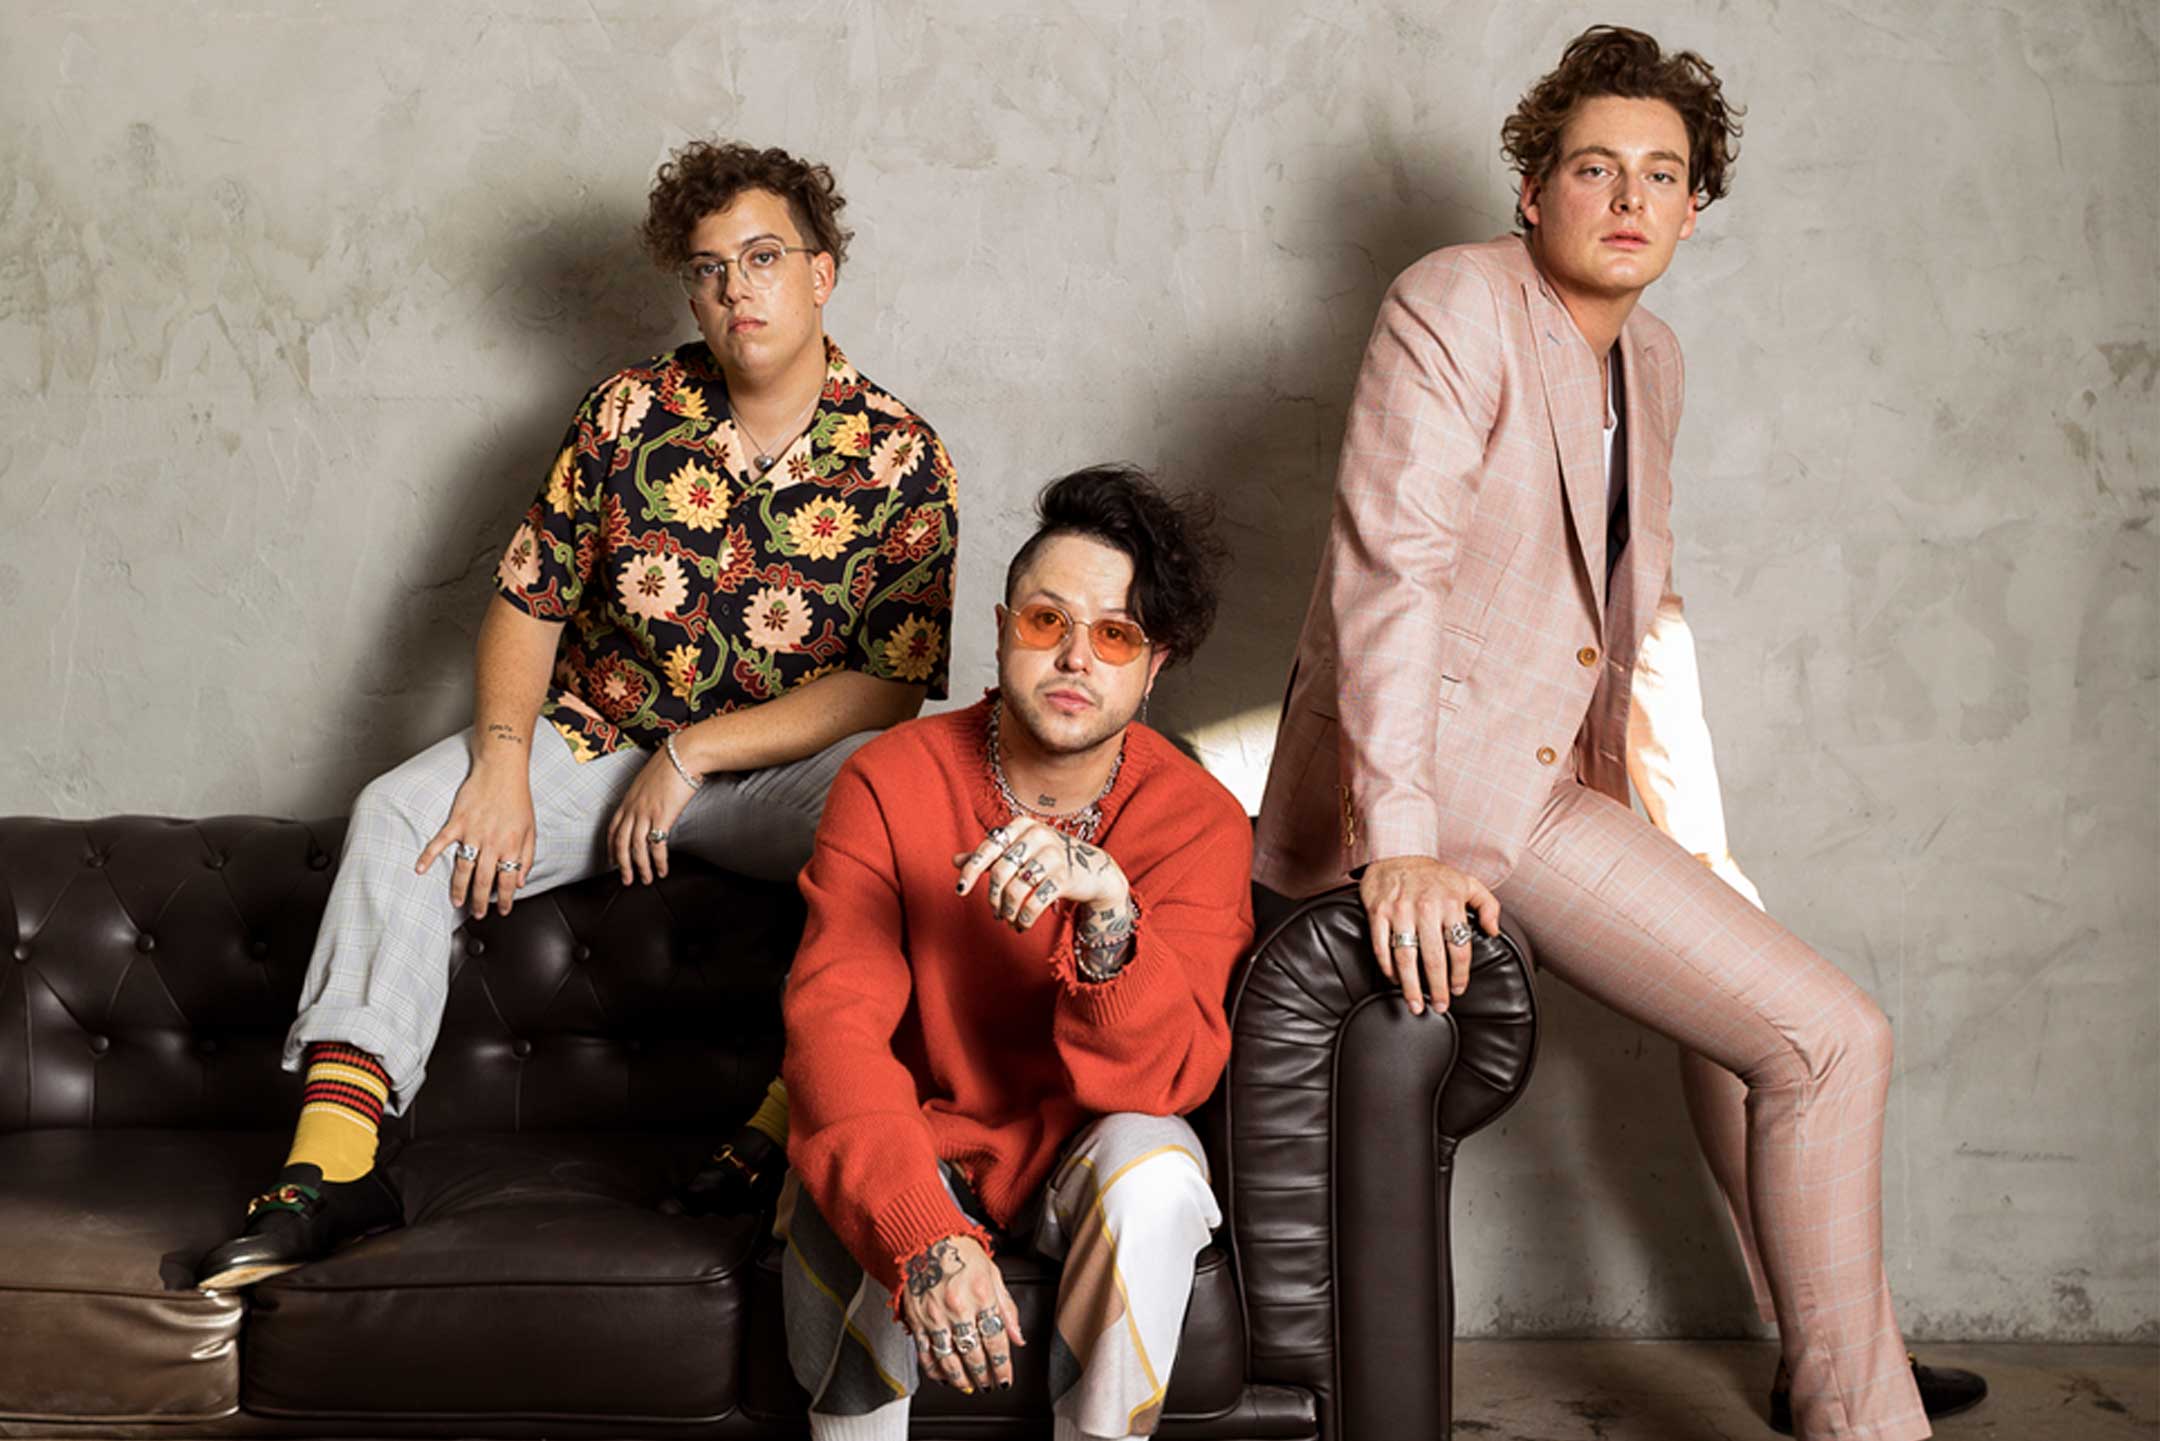 As summer heats up, home haircutting continues to get cooler with the premiere of “buzz cut,” the latest song and video to debut from lovelytheband’s sophomore album “conversations with myself about you,” releasing on Aug. 28, 2020.